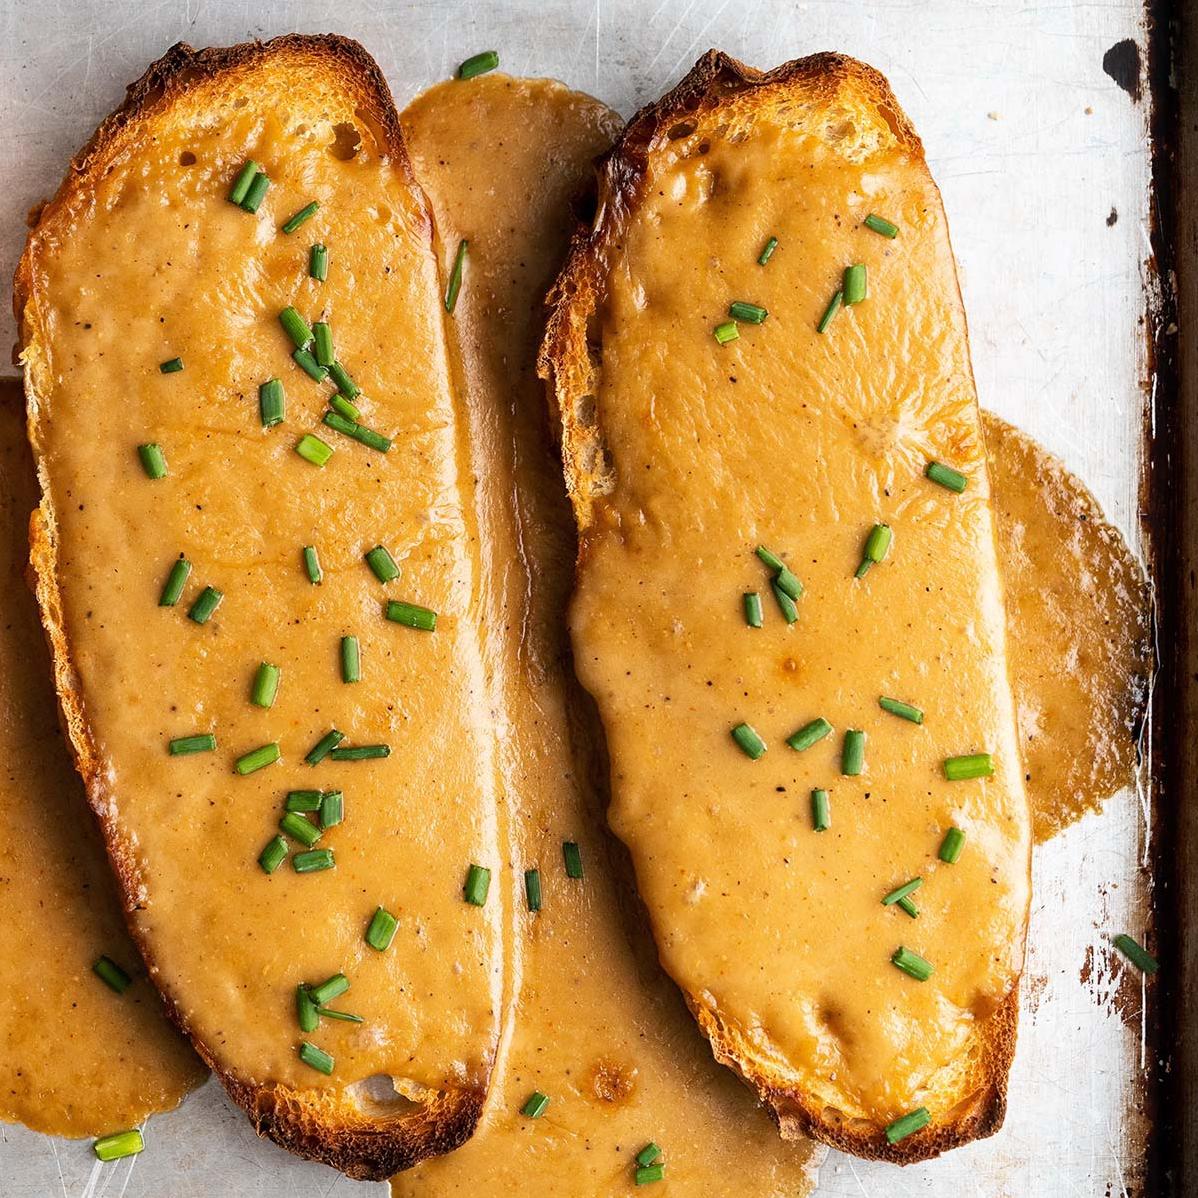  The cheese sauce is the star of the show, but the crispy bread is the unsung hero.